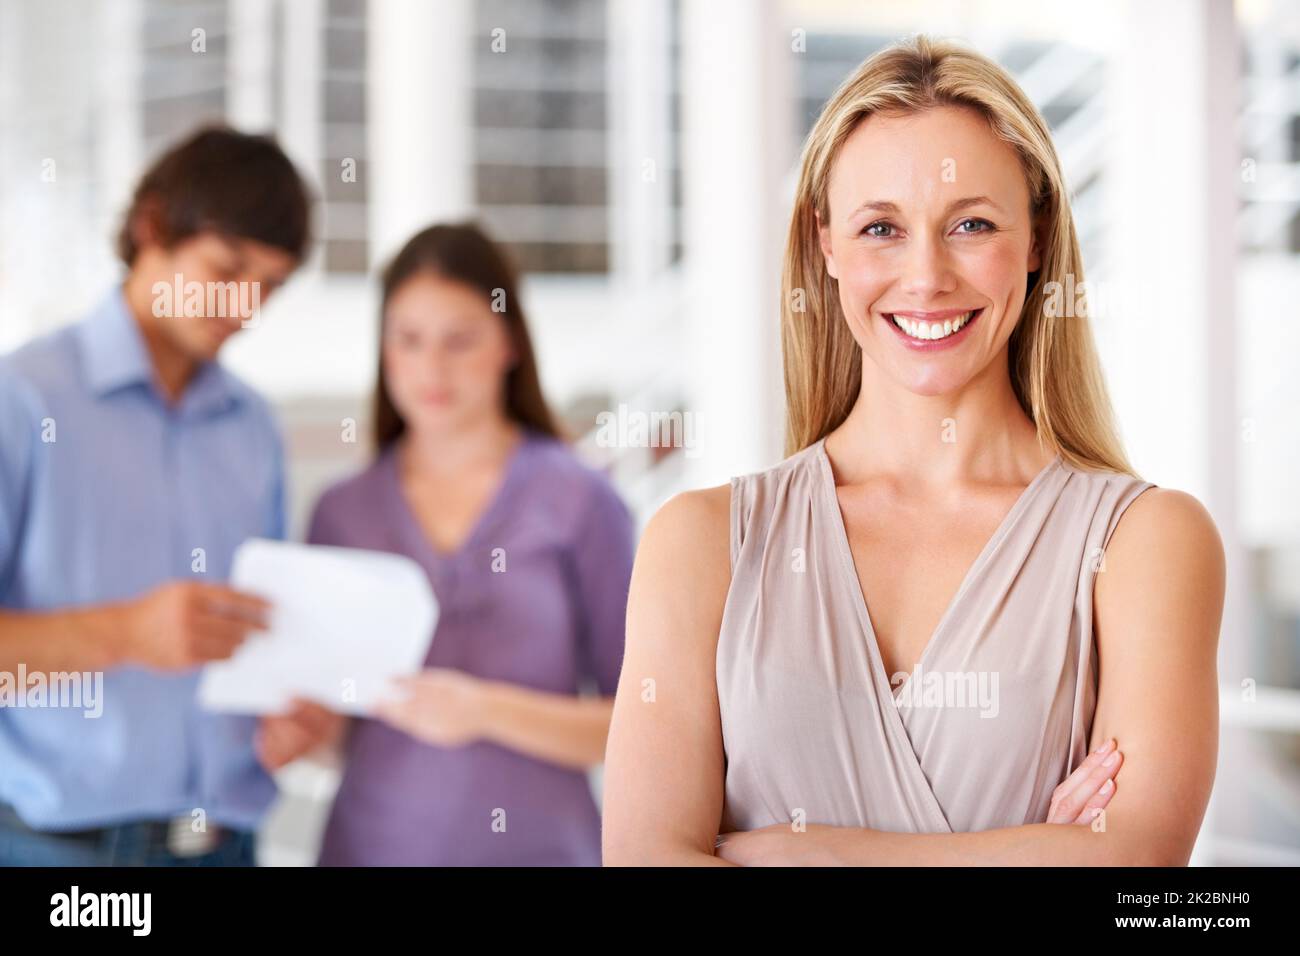 Im taking my team to the top. Shot of a leader smiling at the camera with colleagues blurred in the background. Stock Photo